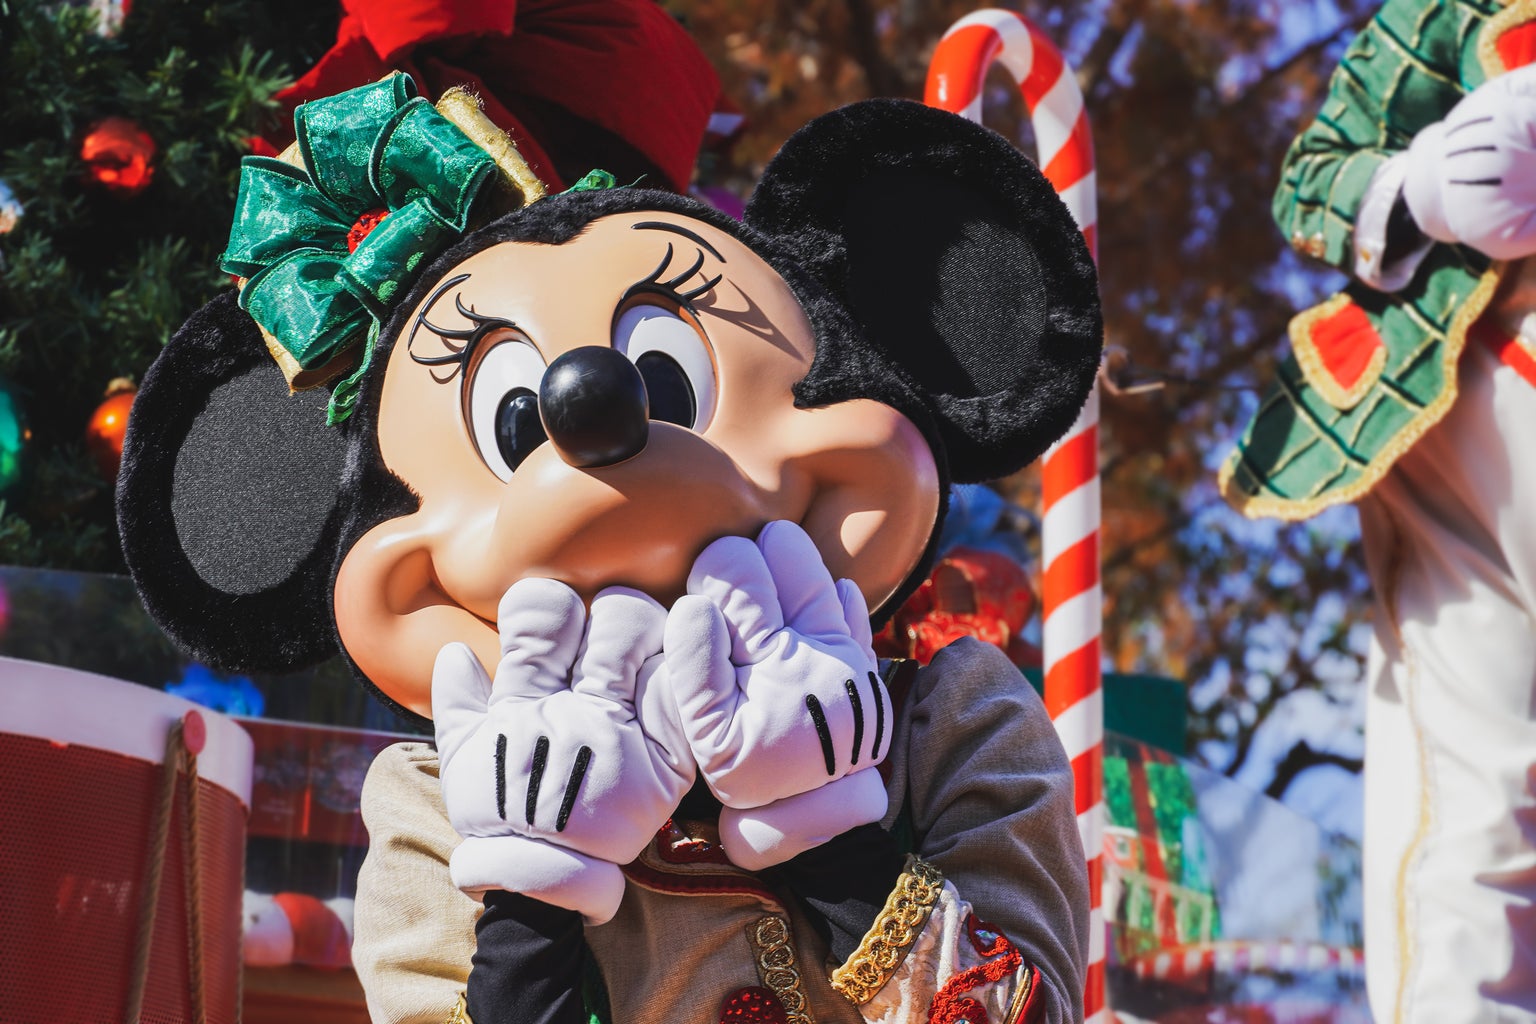 Minnie Mouse dressed in Christmas attire in a Disney park